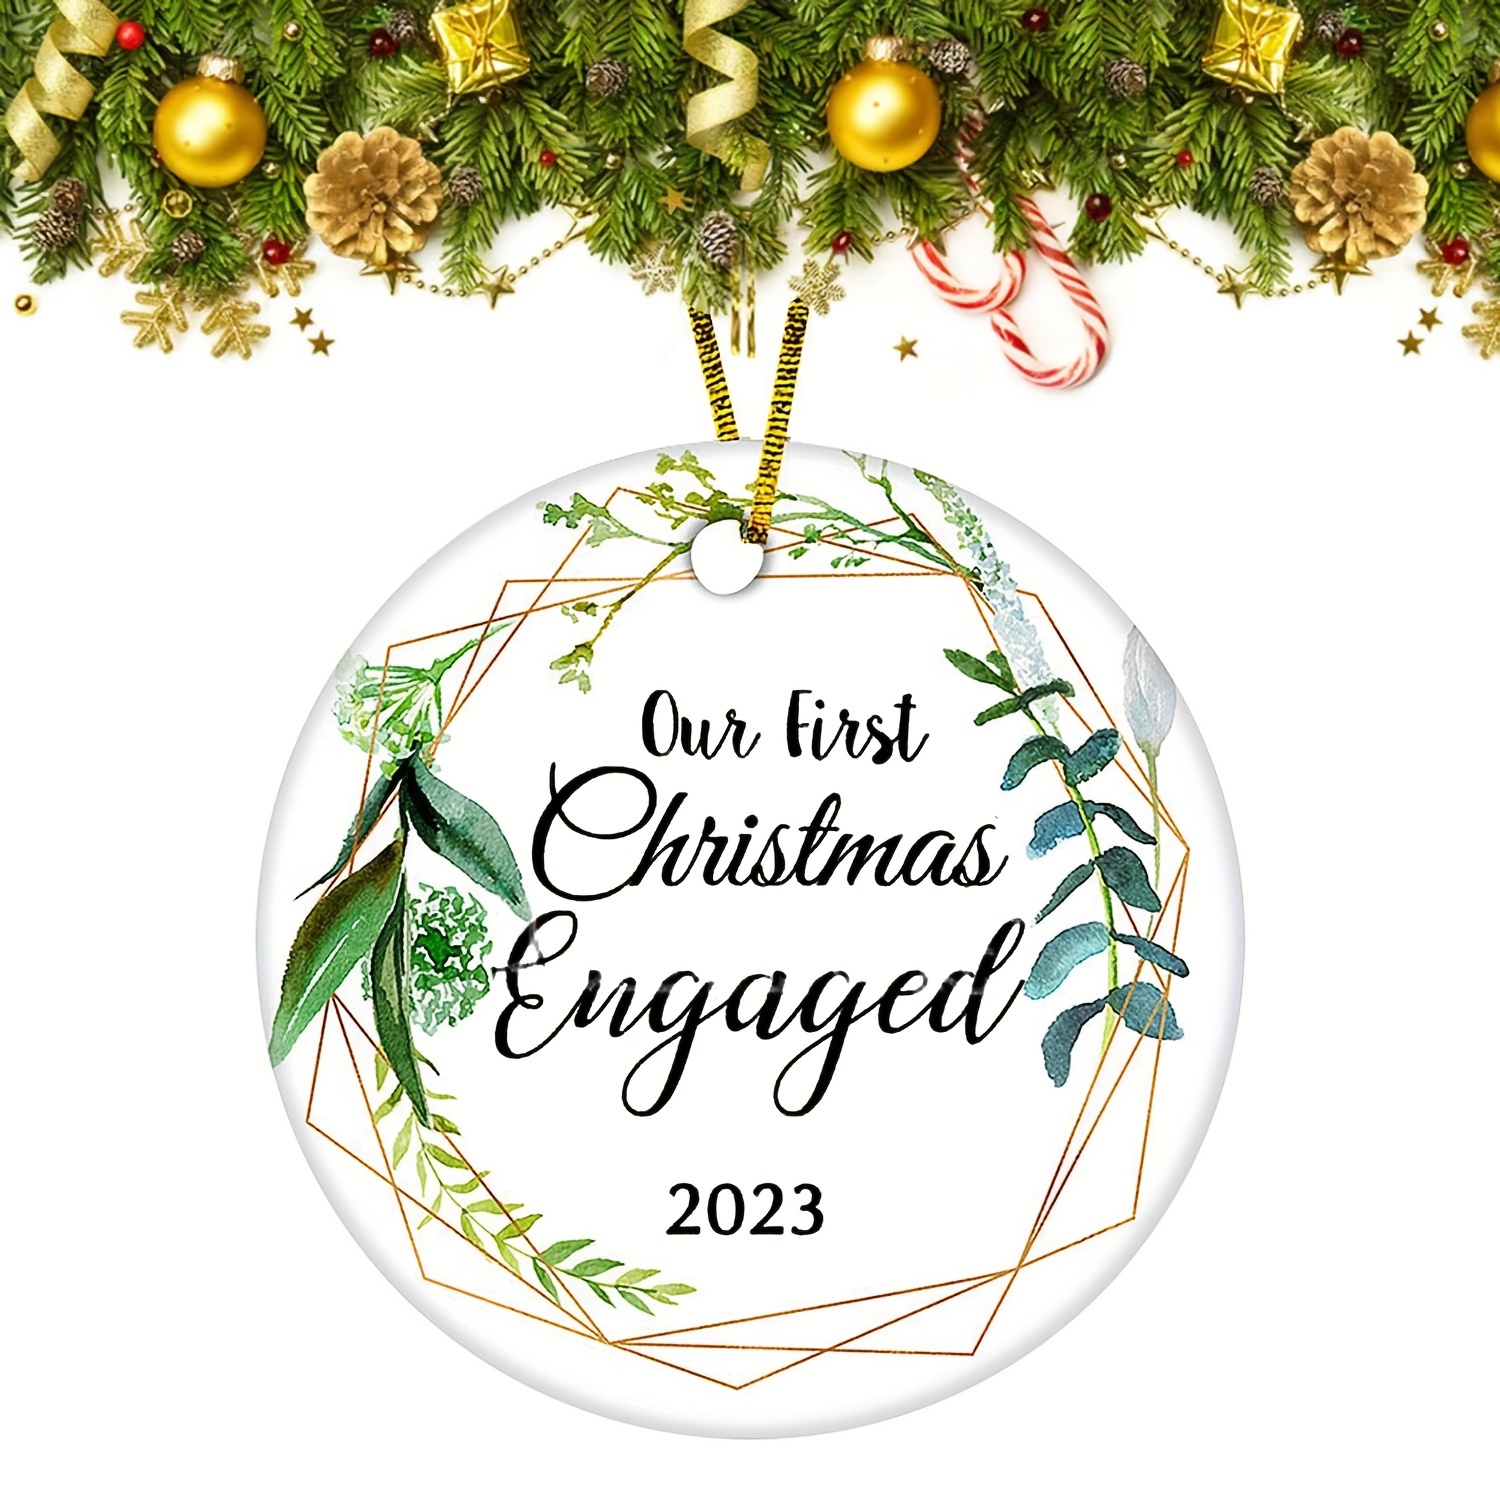 Engaged Ornament Engagement Gift Gift for Engaged Couple -   Christmas  gifts for couples, Engagement ornaments, Christmas ornaments